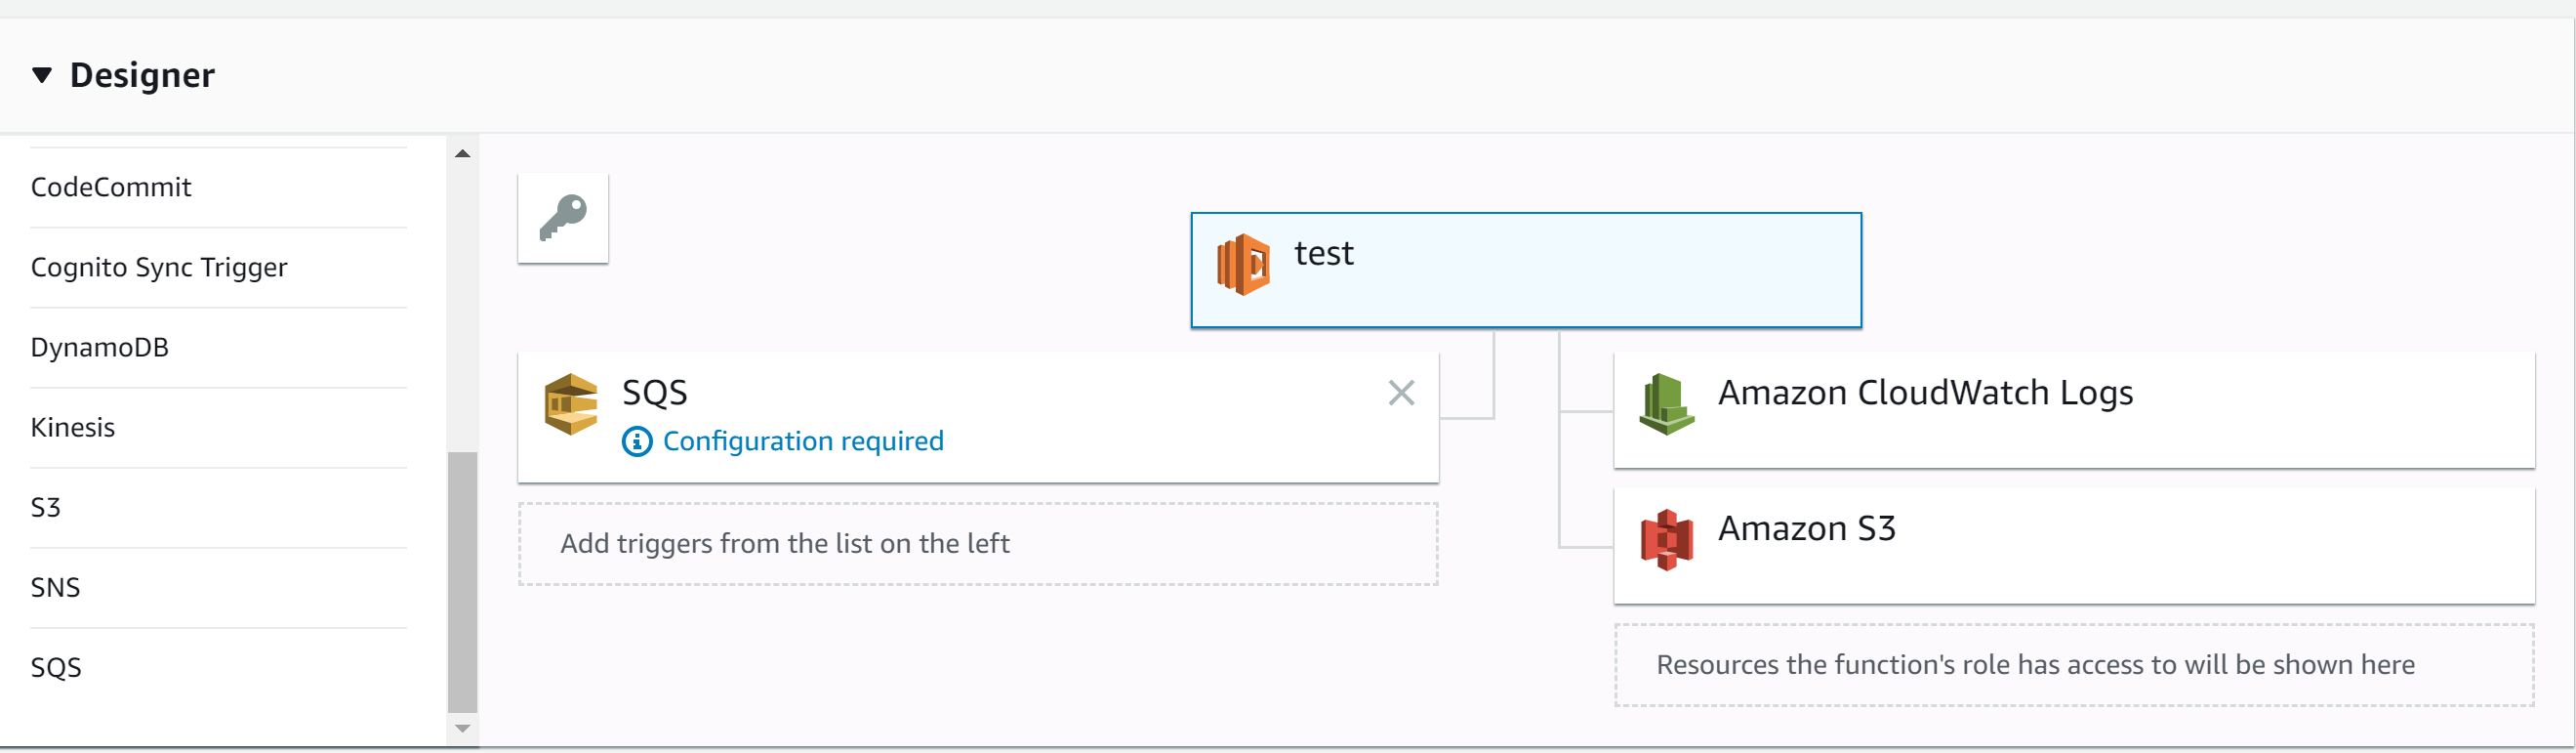 AWS Lambda can now be invoked directly from SQS